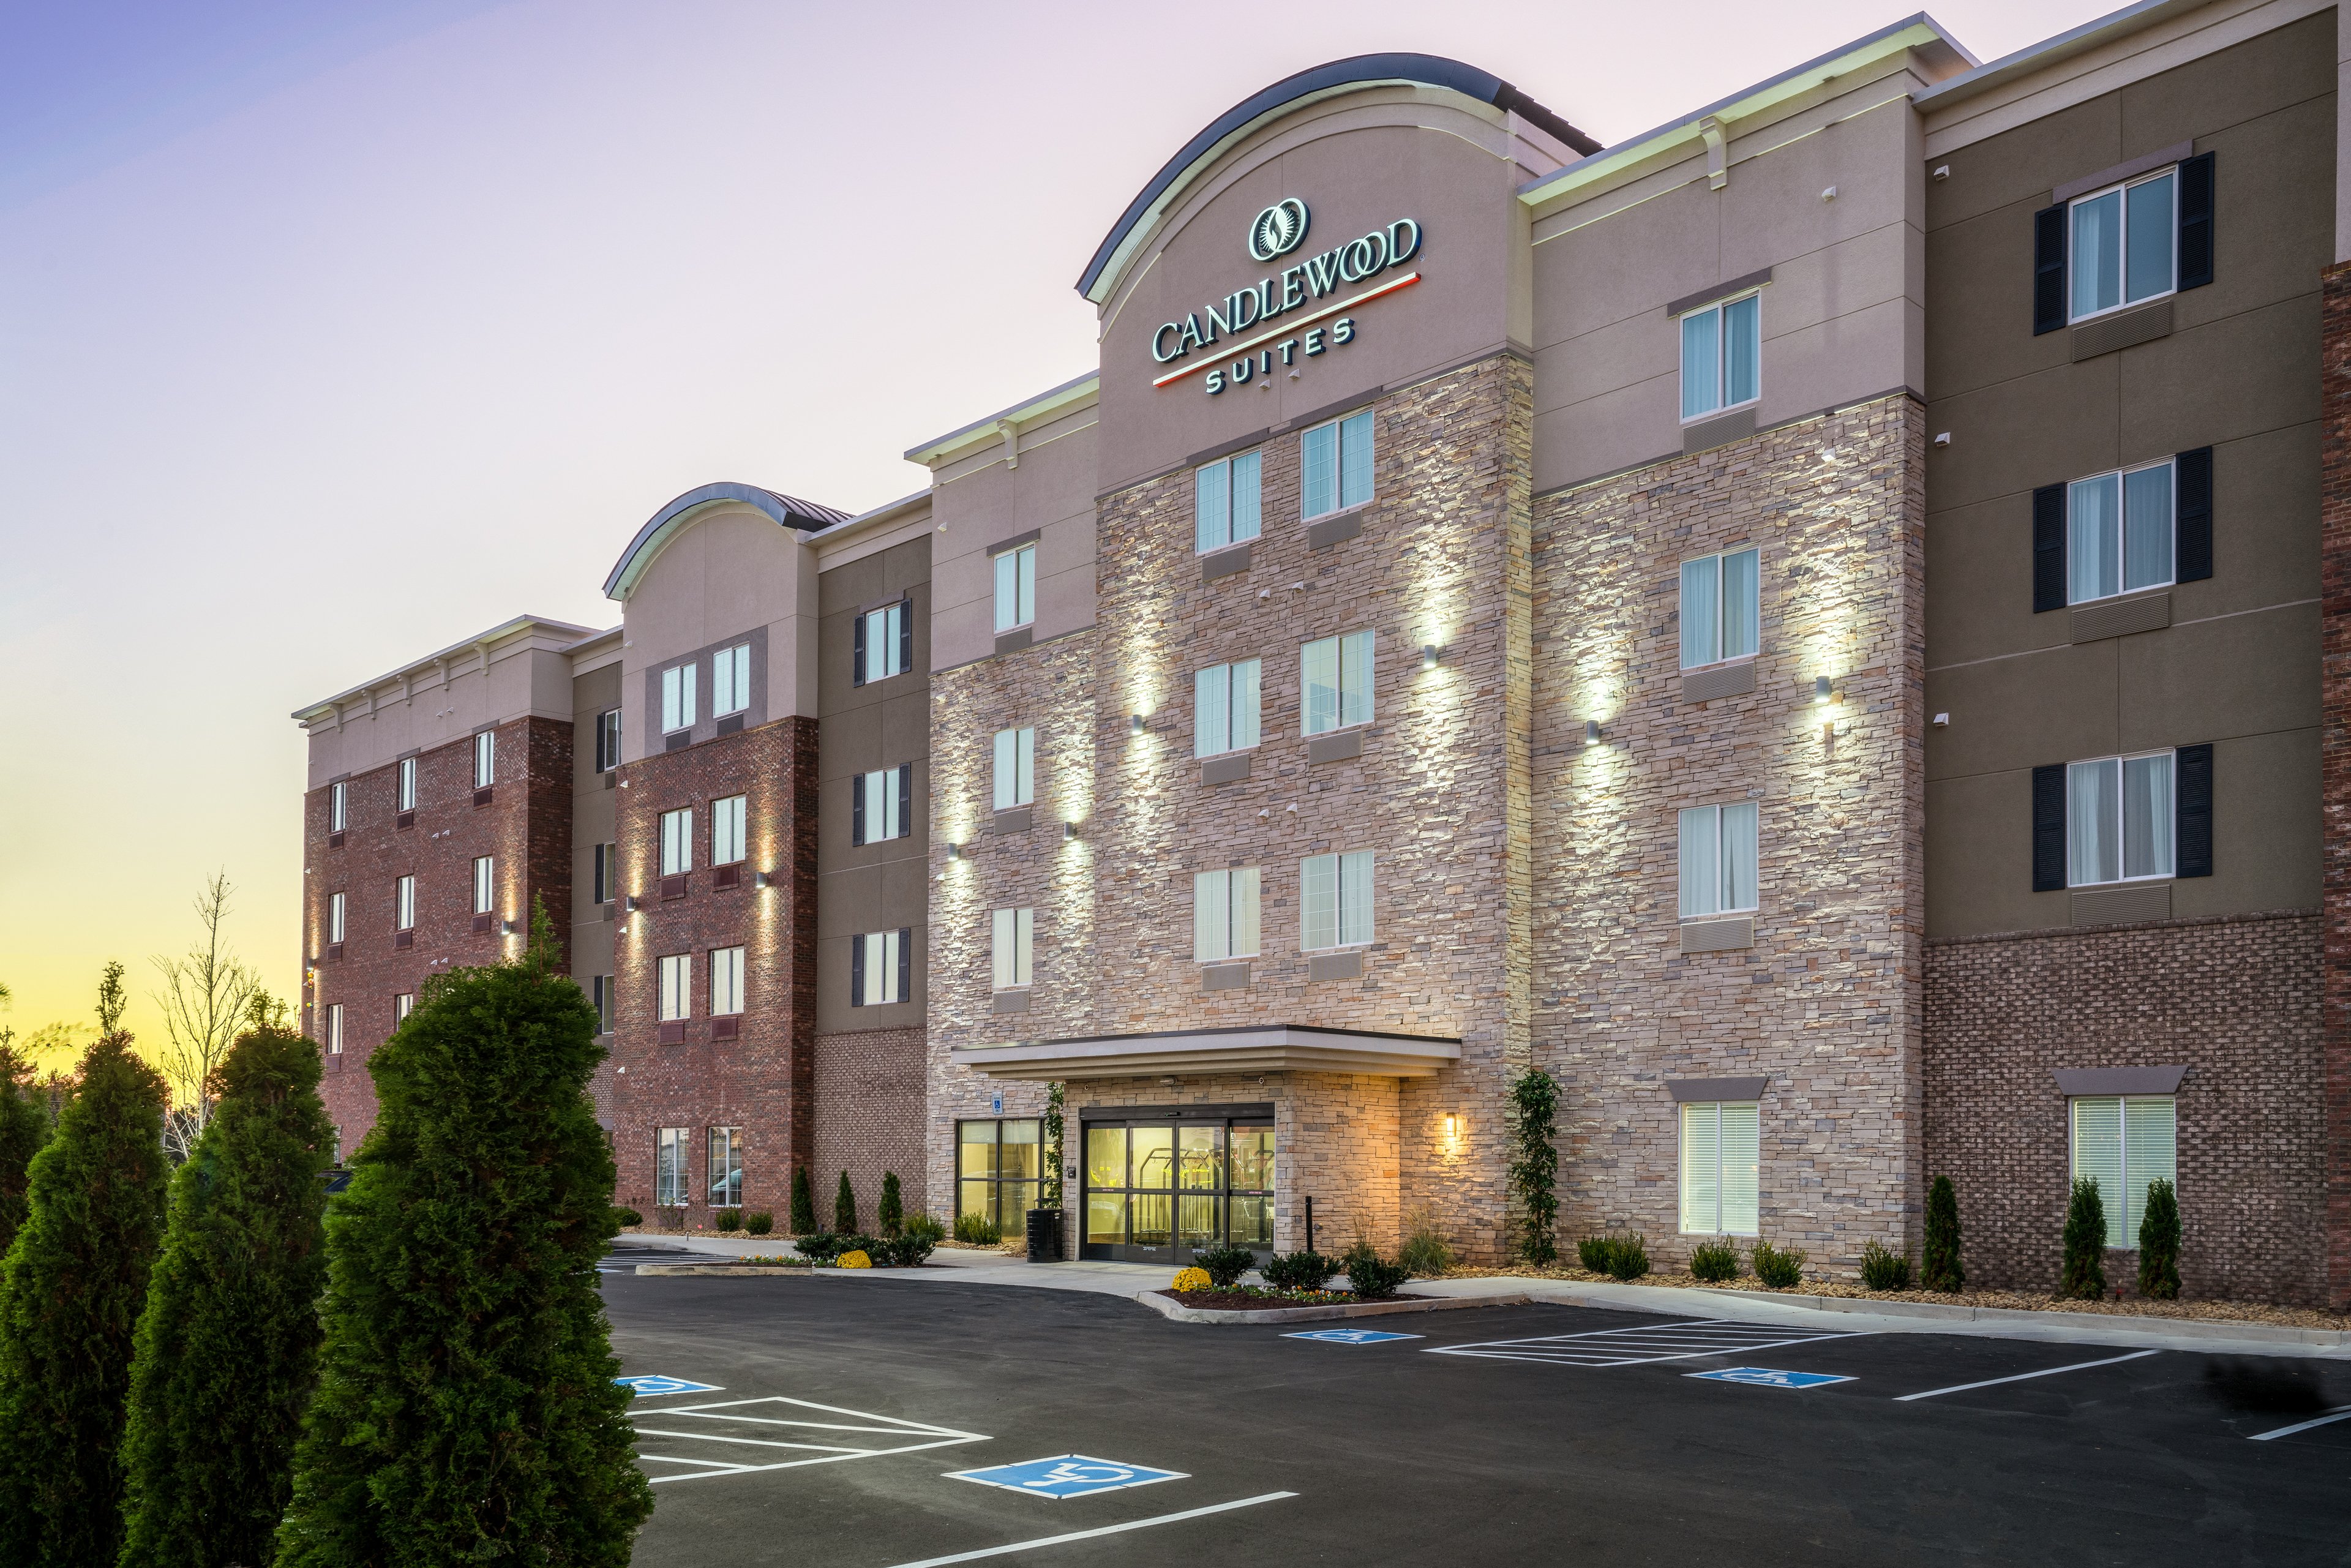 Candlewood Suites in - Reviews and Reservations